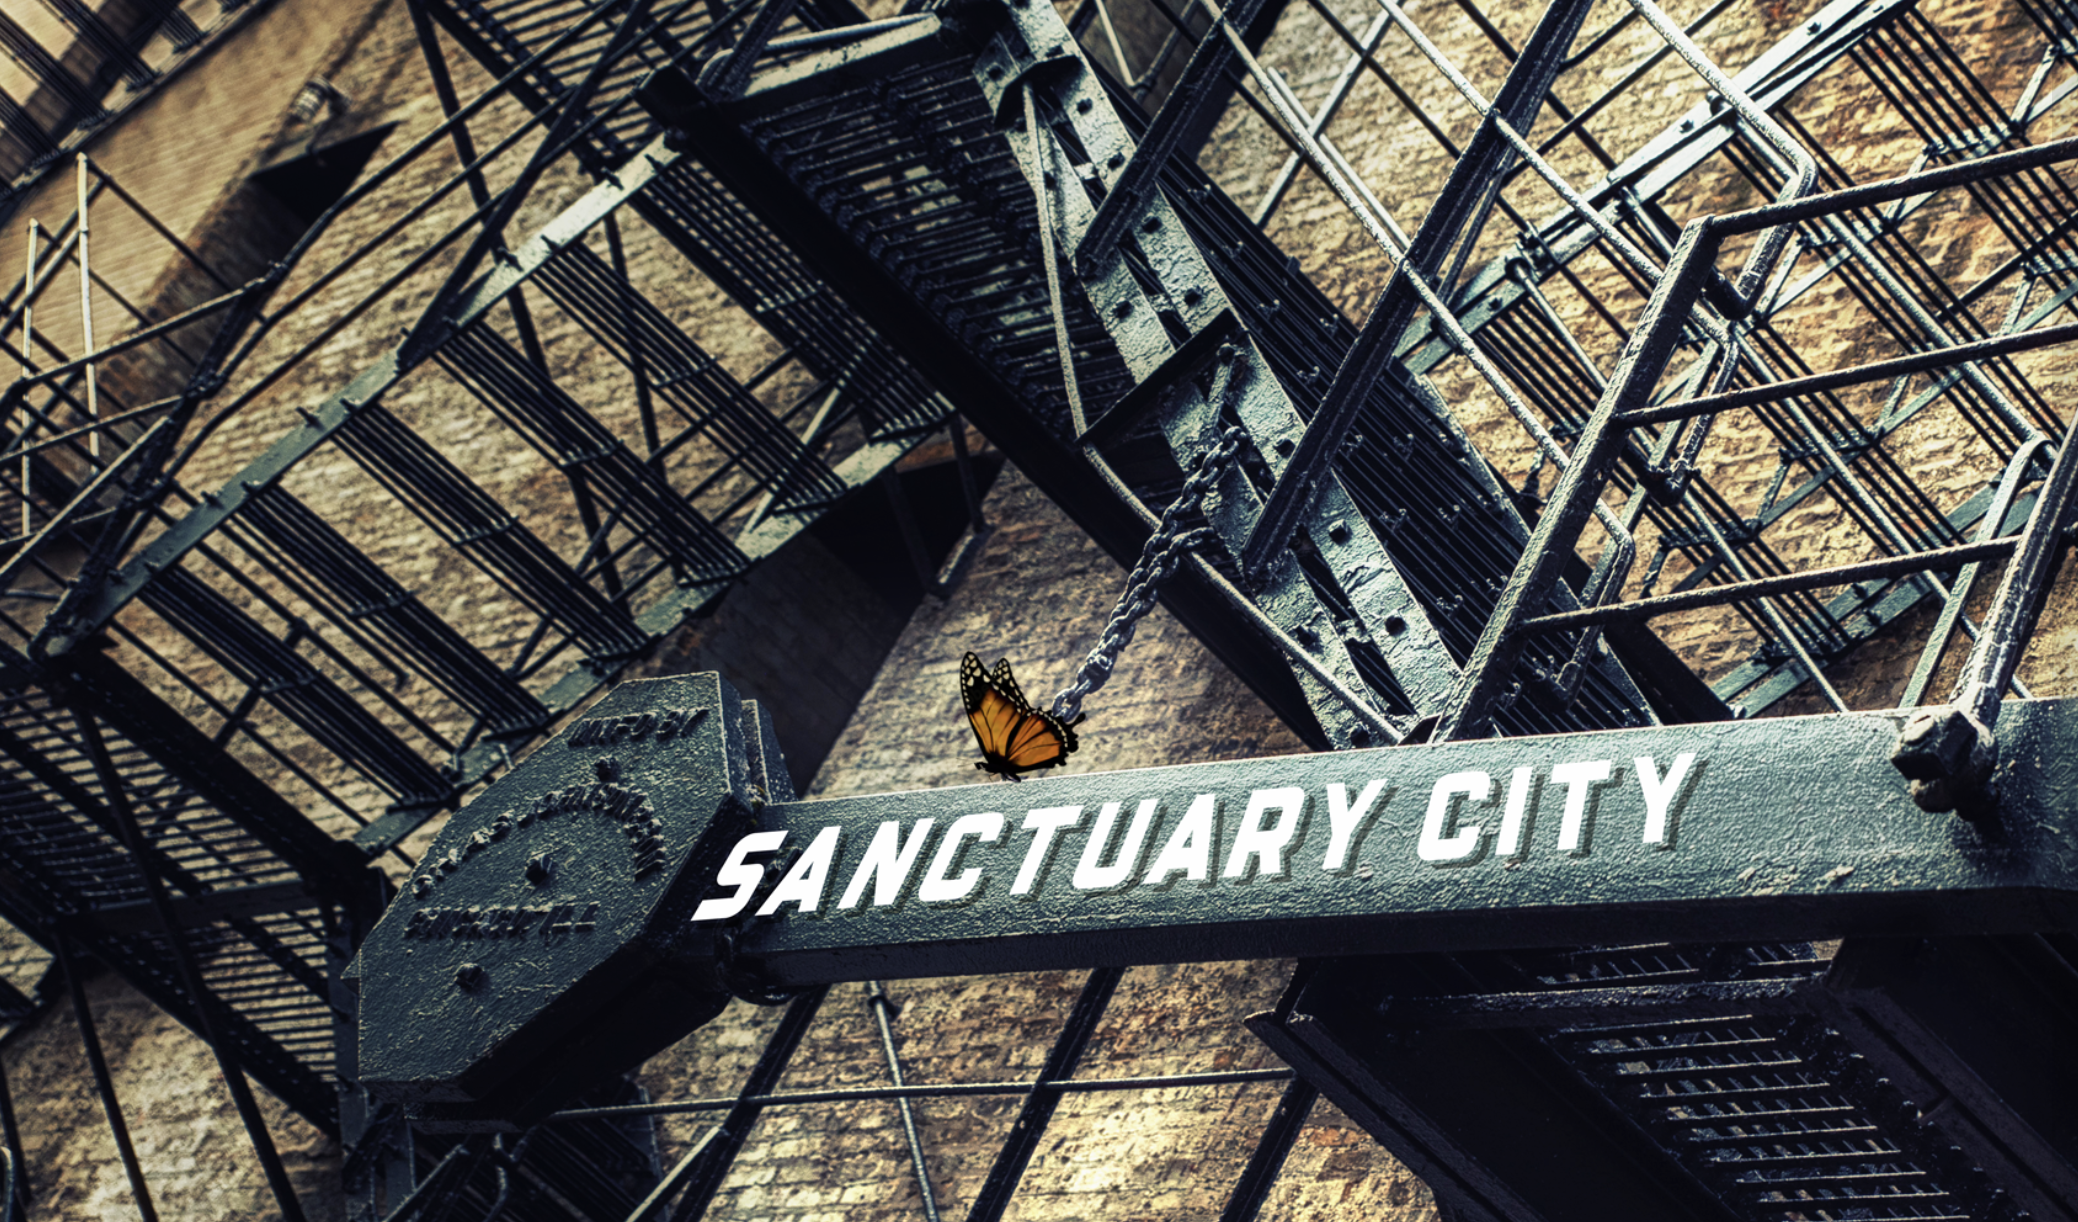 “Sanctuary City” Brings A Timeless Journey To Hartford Audiences